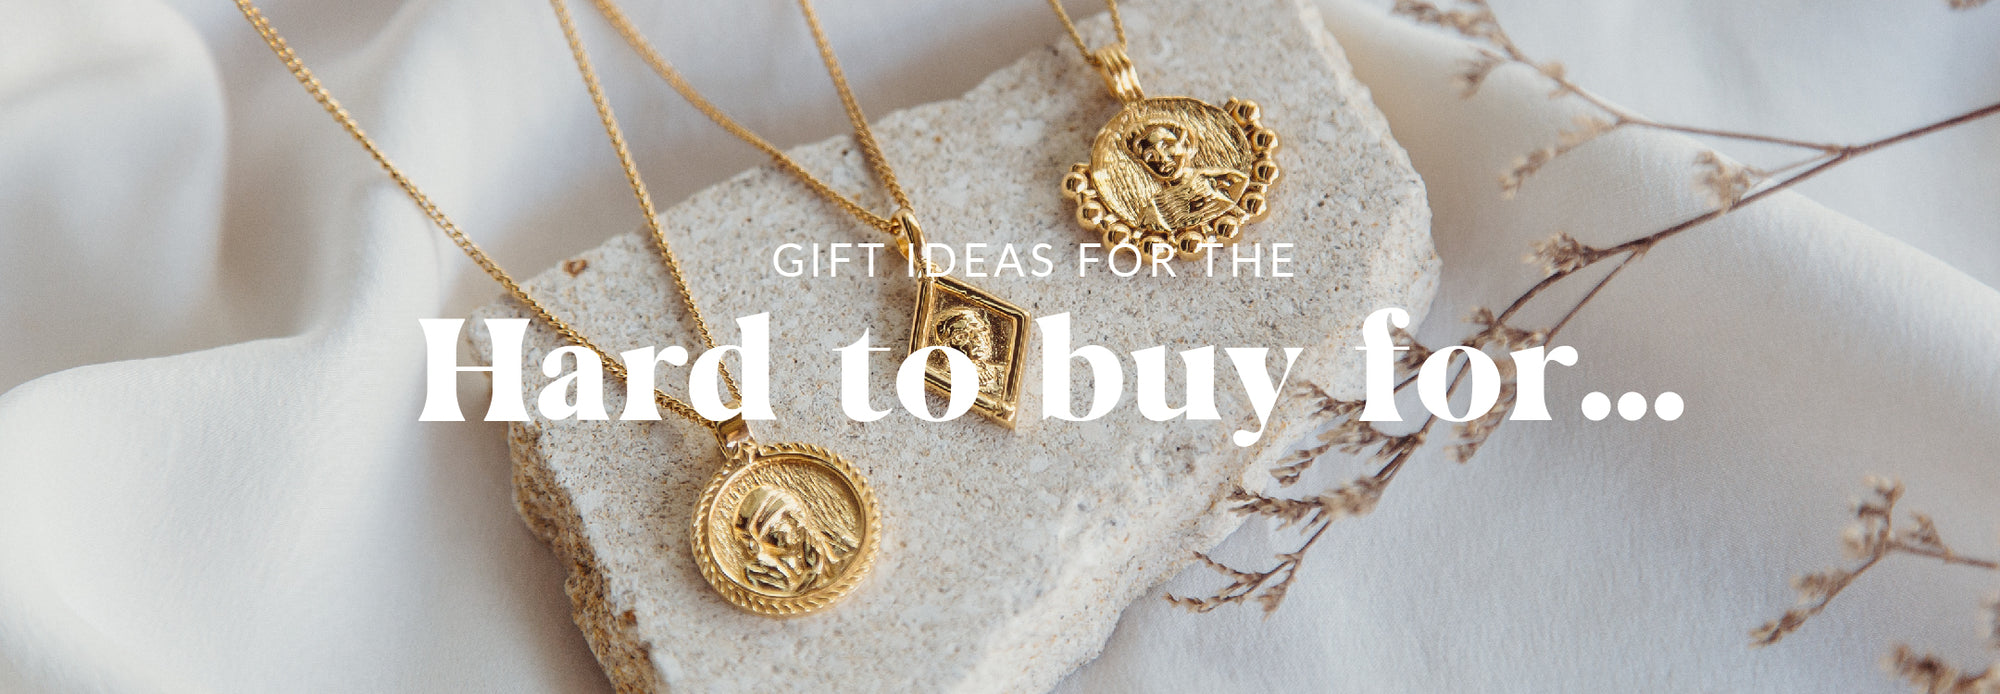 Gift Ideas for the Hard to buy for